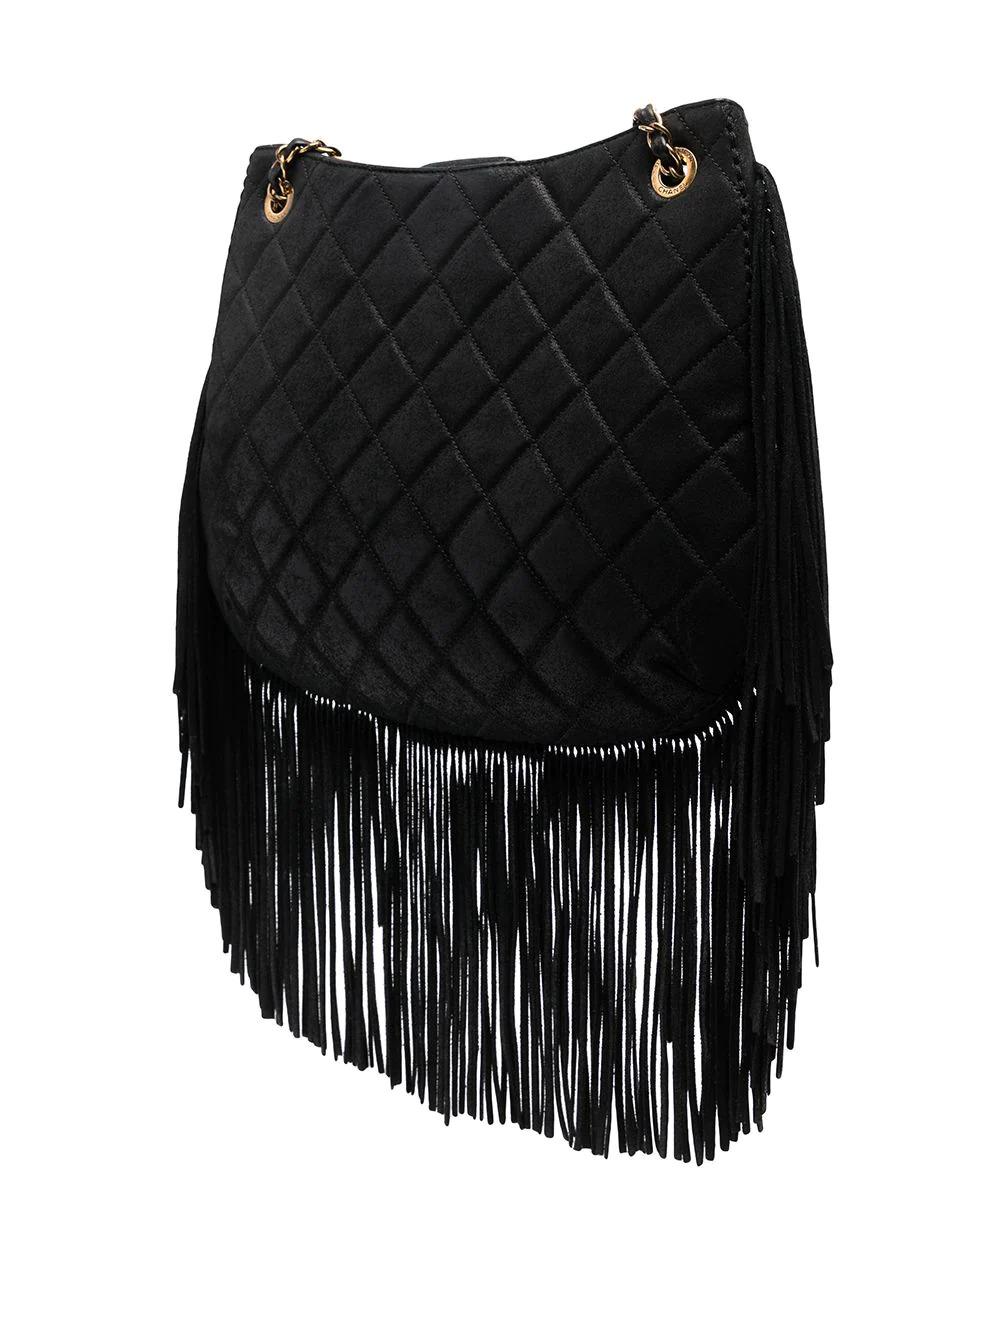 The bag selection from the 2014 Paris-Dallas Collection featured a number designs with references to horse satchels, riding gear and tassels. This pre-owned Chanel bag is no different, with hobo style fringe attached to the bottom for a western